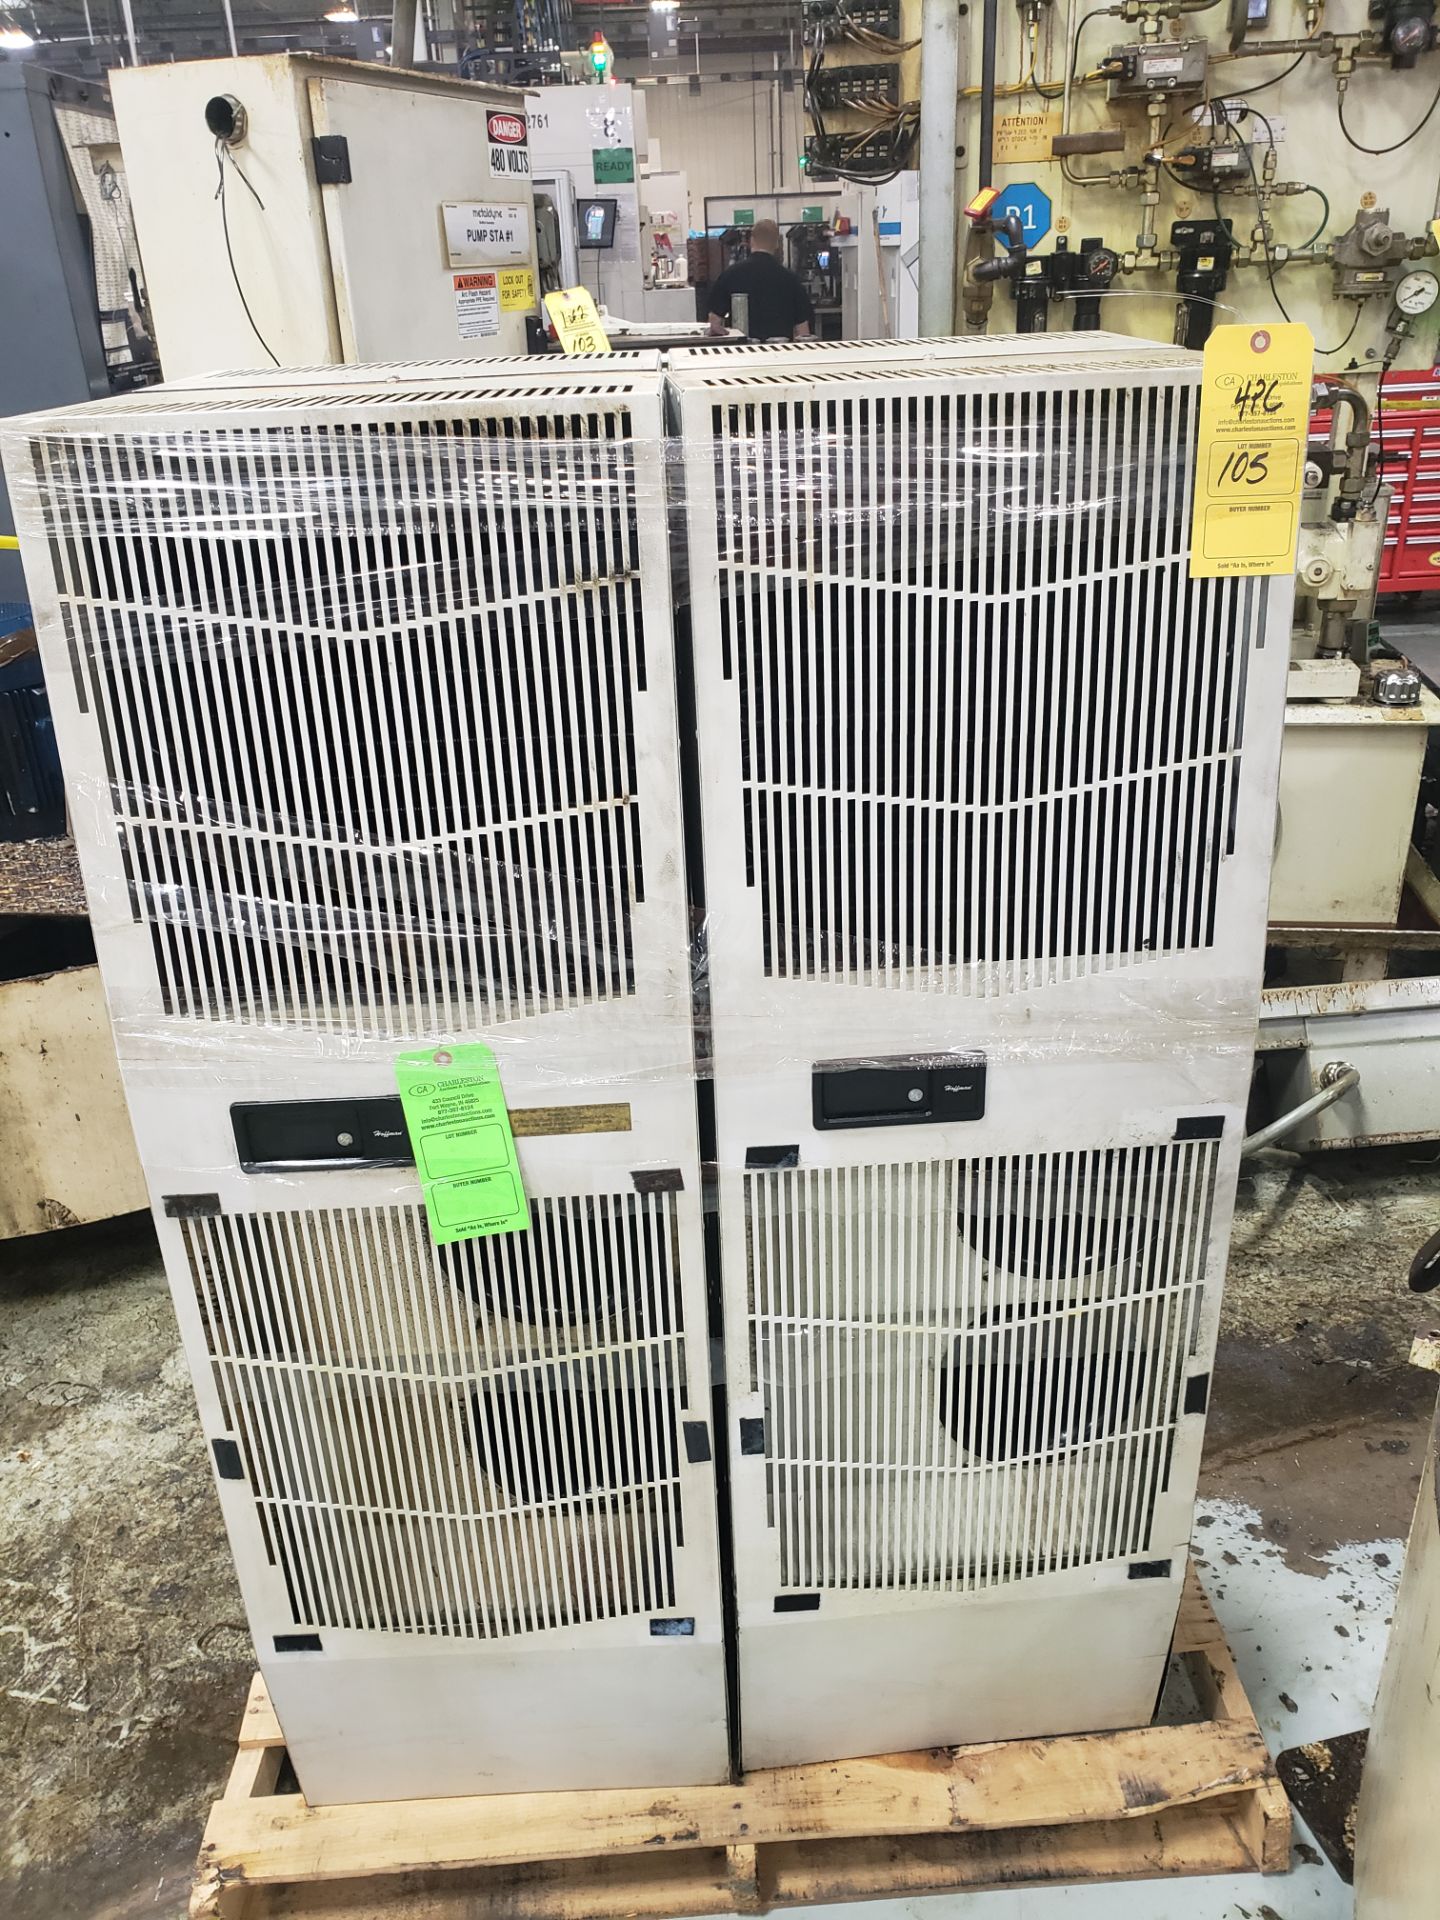 (4) HOFFMAN CHILLERS VOLTS 400/460 50/60HZ 3-PHASE(LOCATED AT: 131 W. HARVEST STREET, BLUFFTON, IN